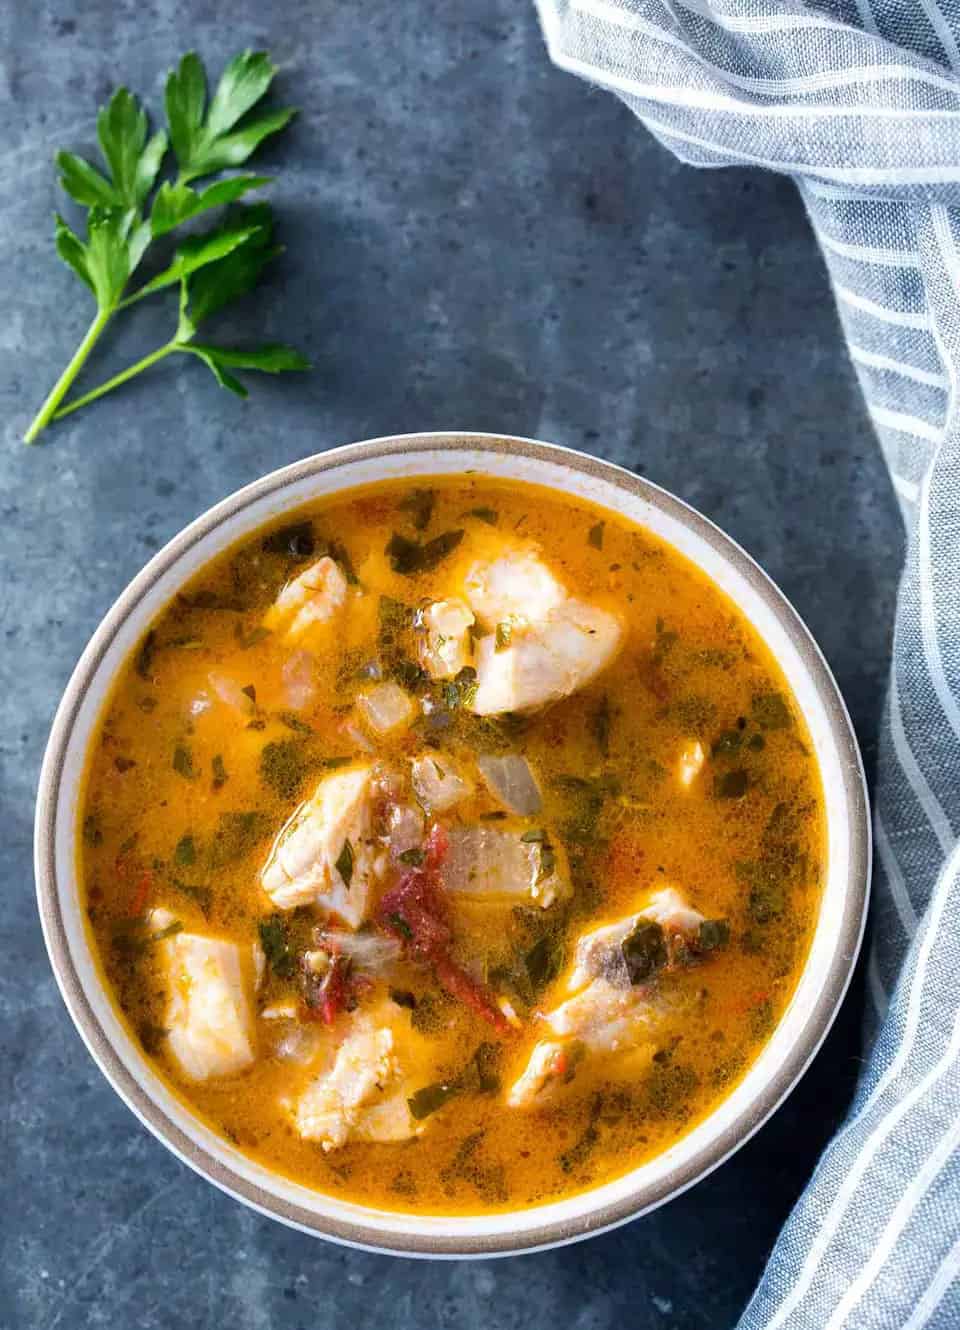 Quick and easy fish stew recipe